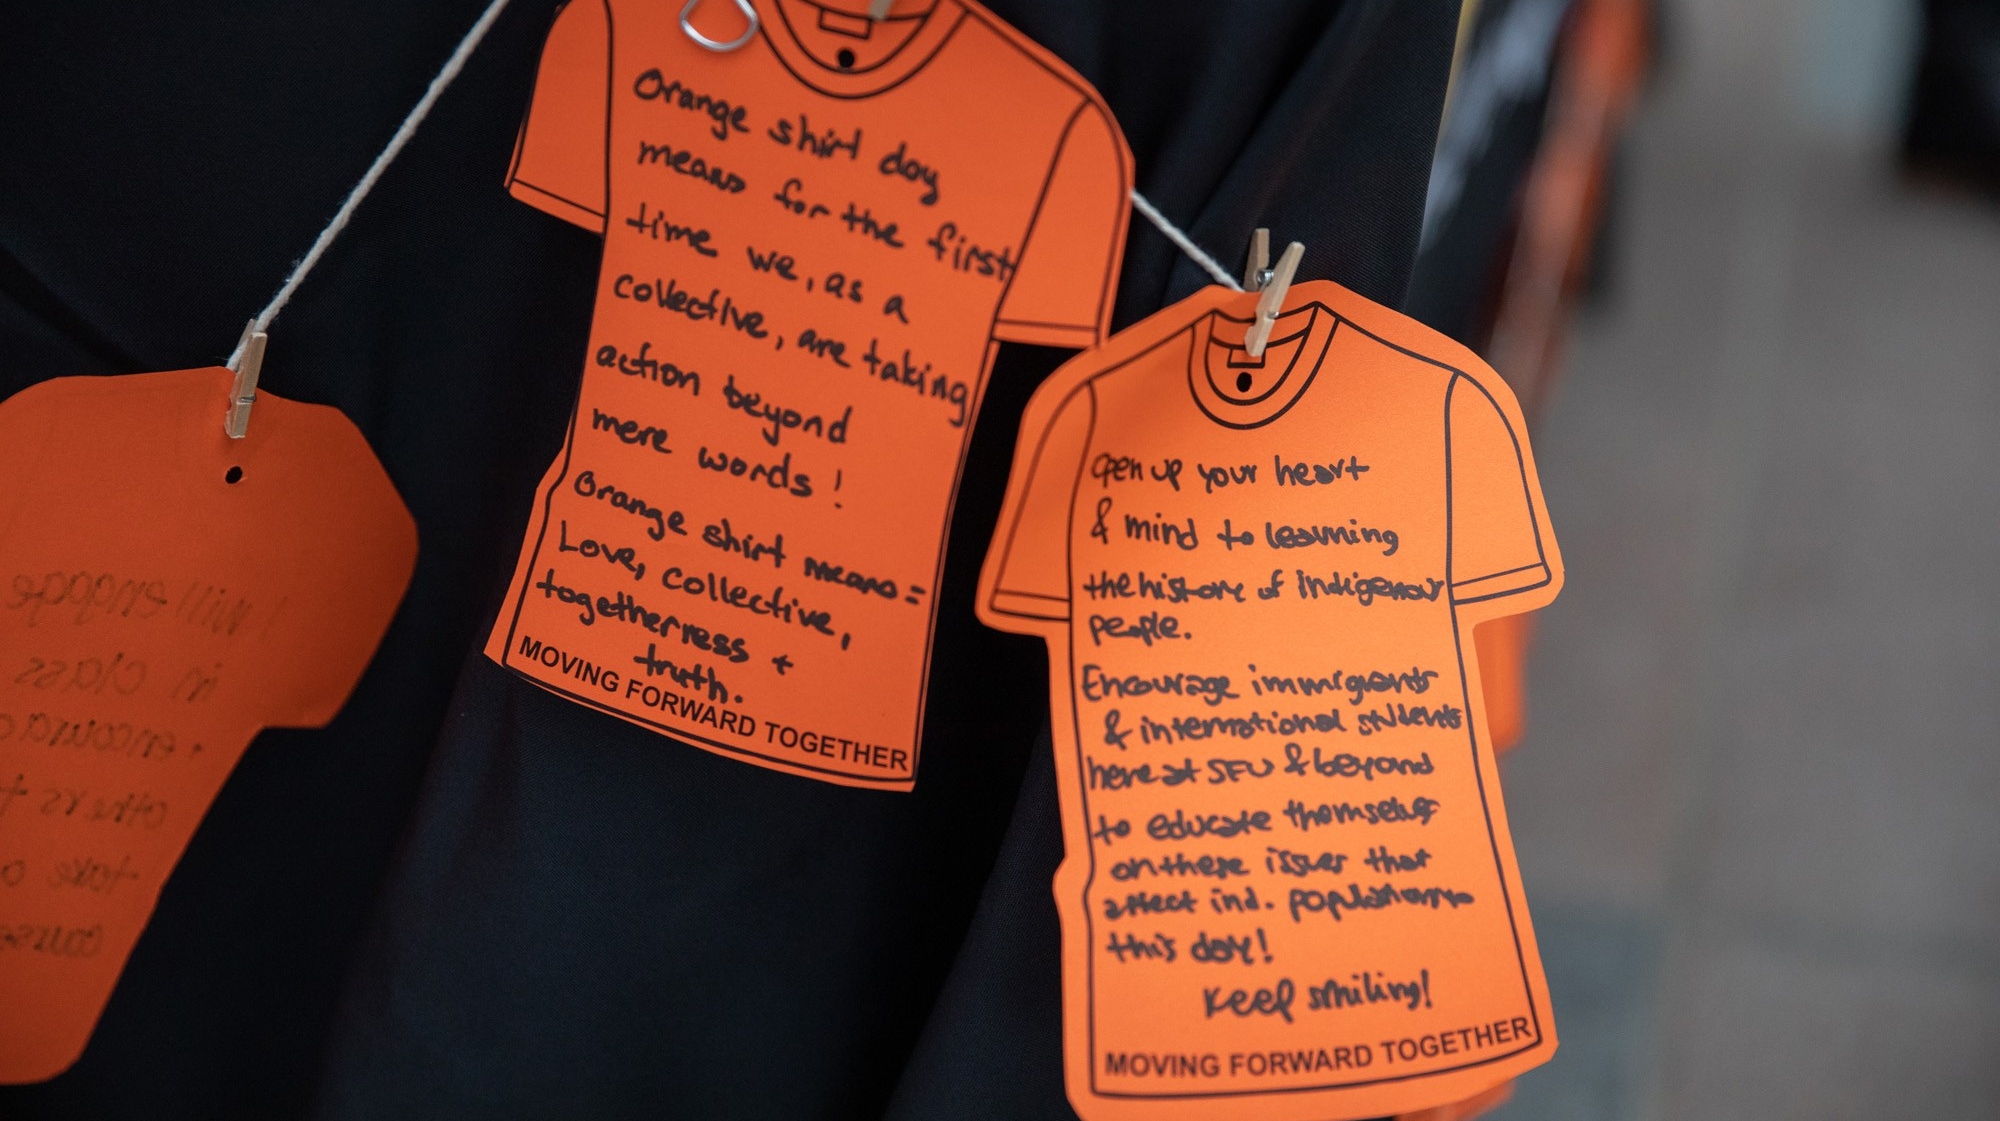 The community shares reflections on reconciliation and the meaning of Orange Shirt Day